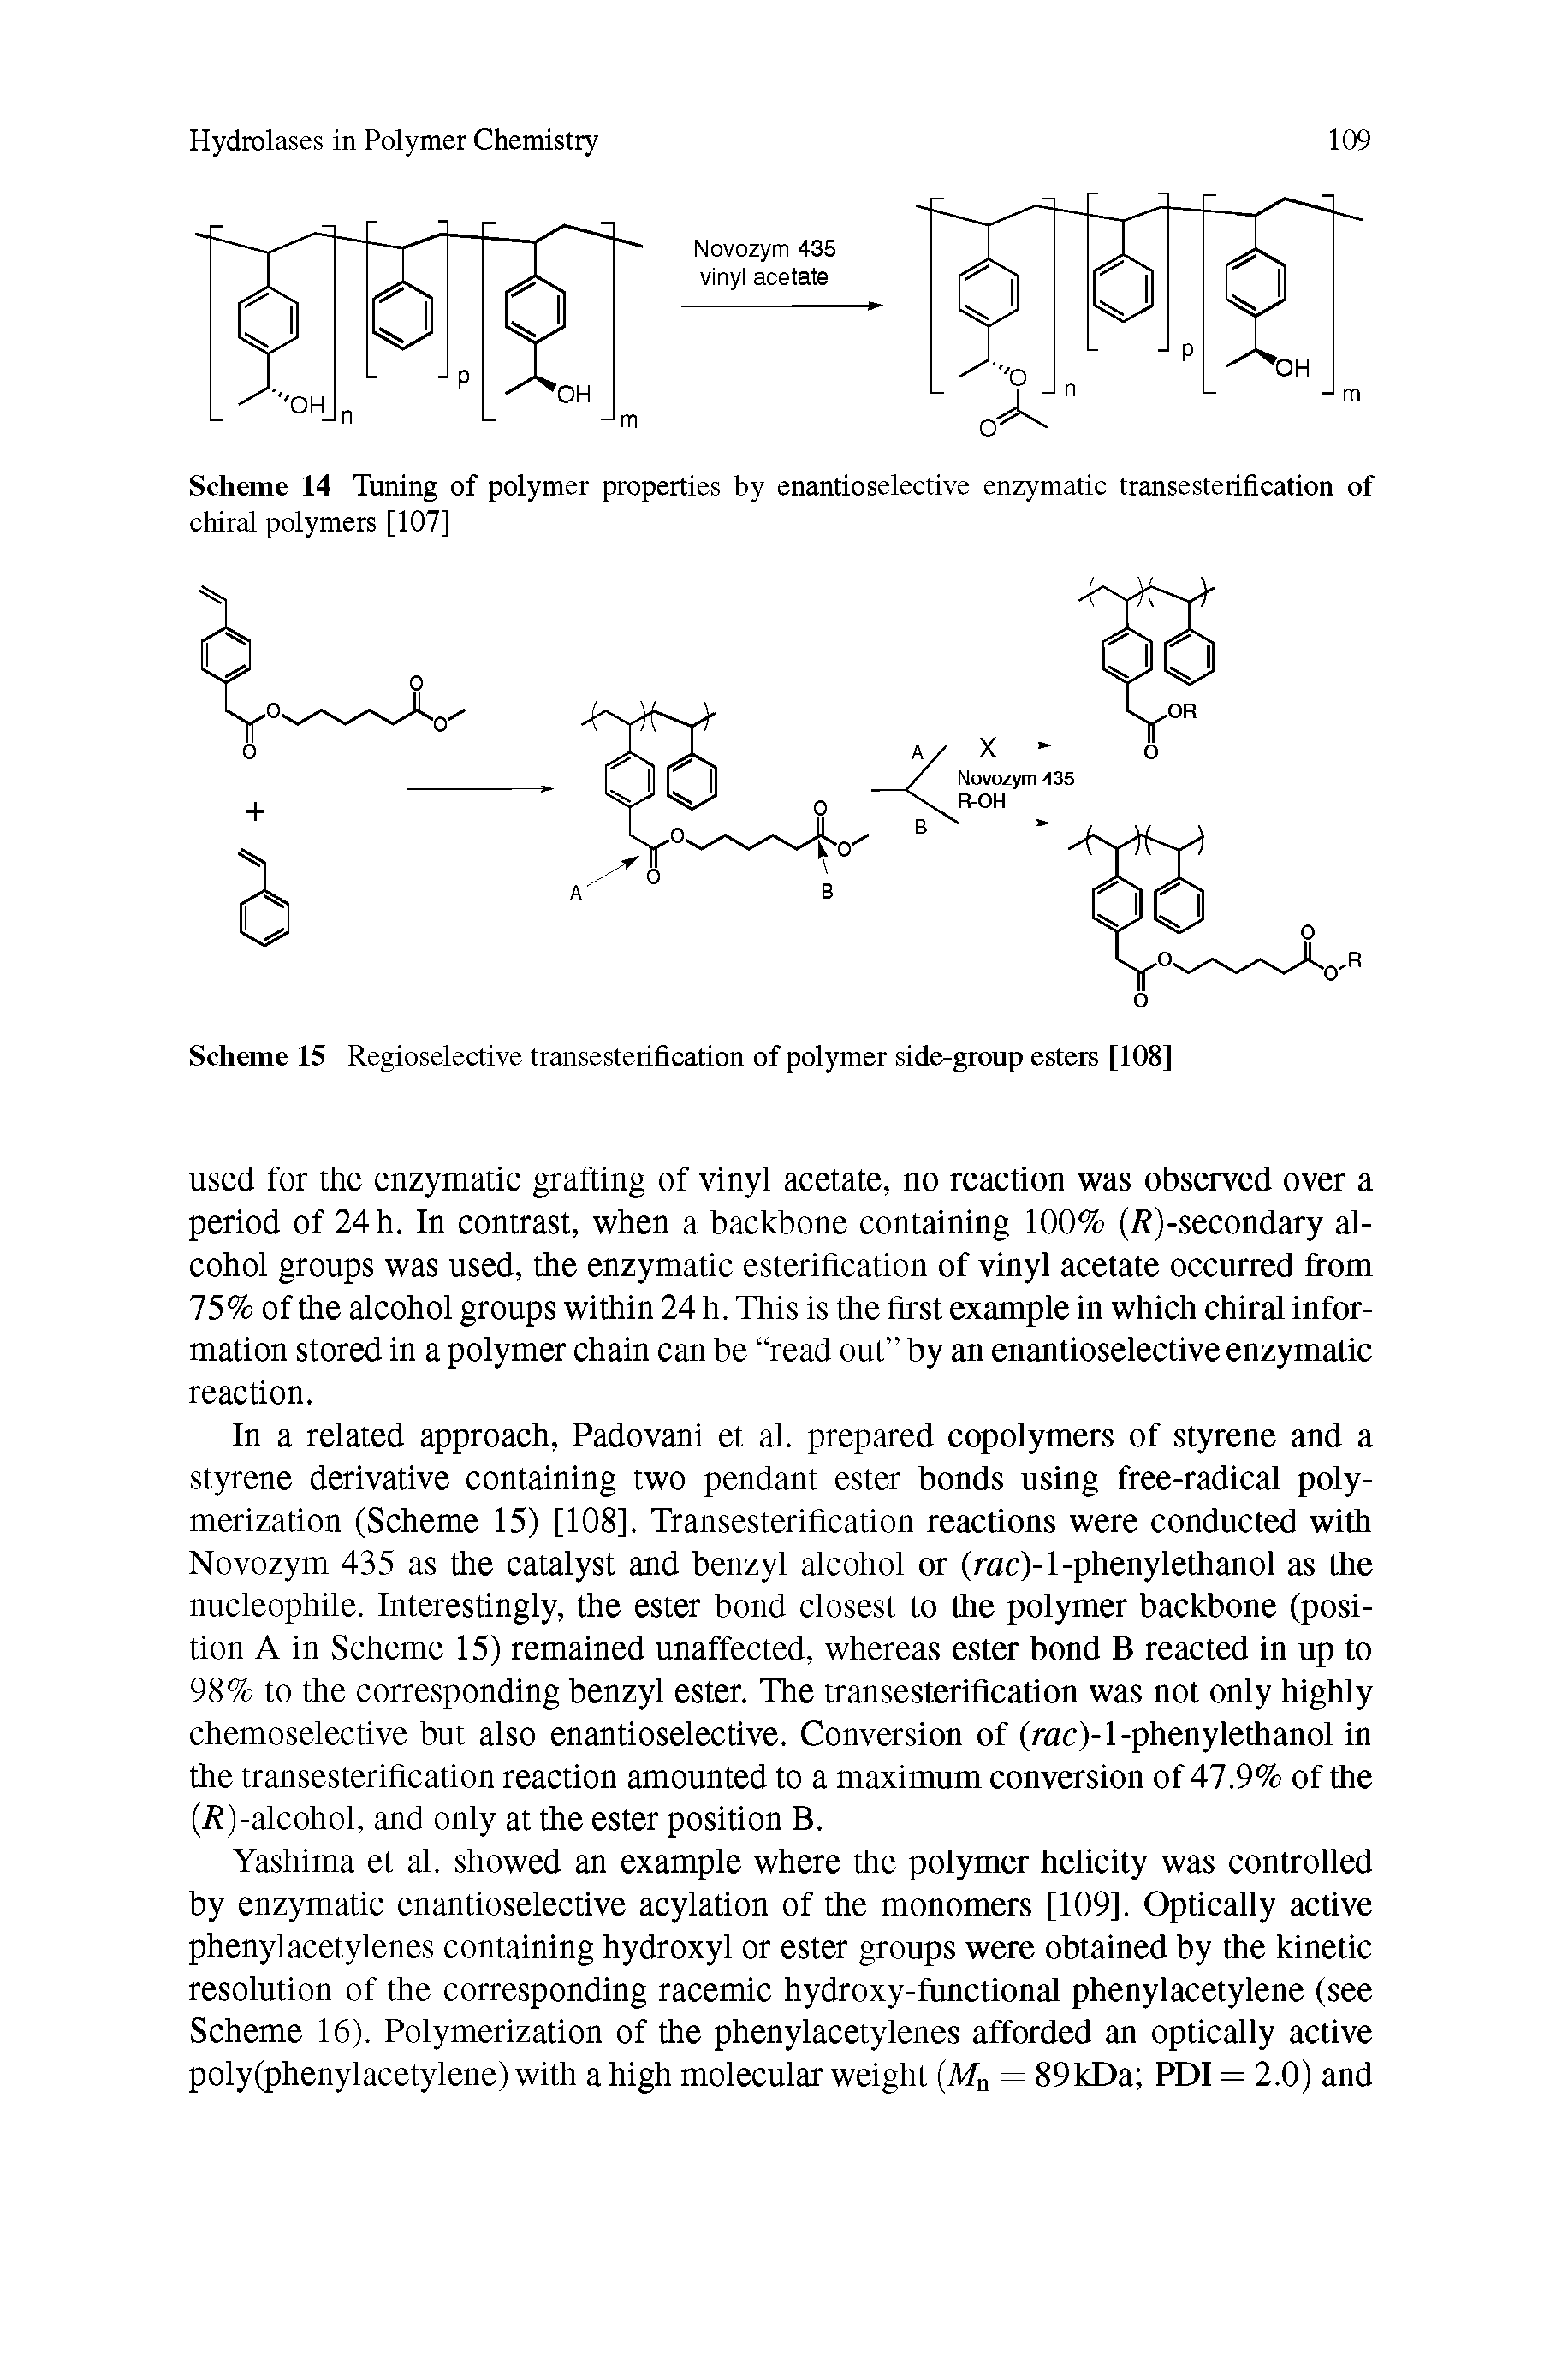 Scheme 15 Regioselective transesteiification of polymer side-group esters [108]...